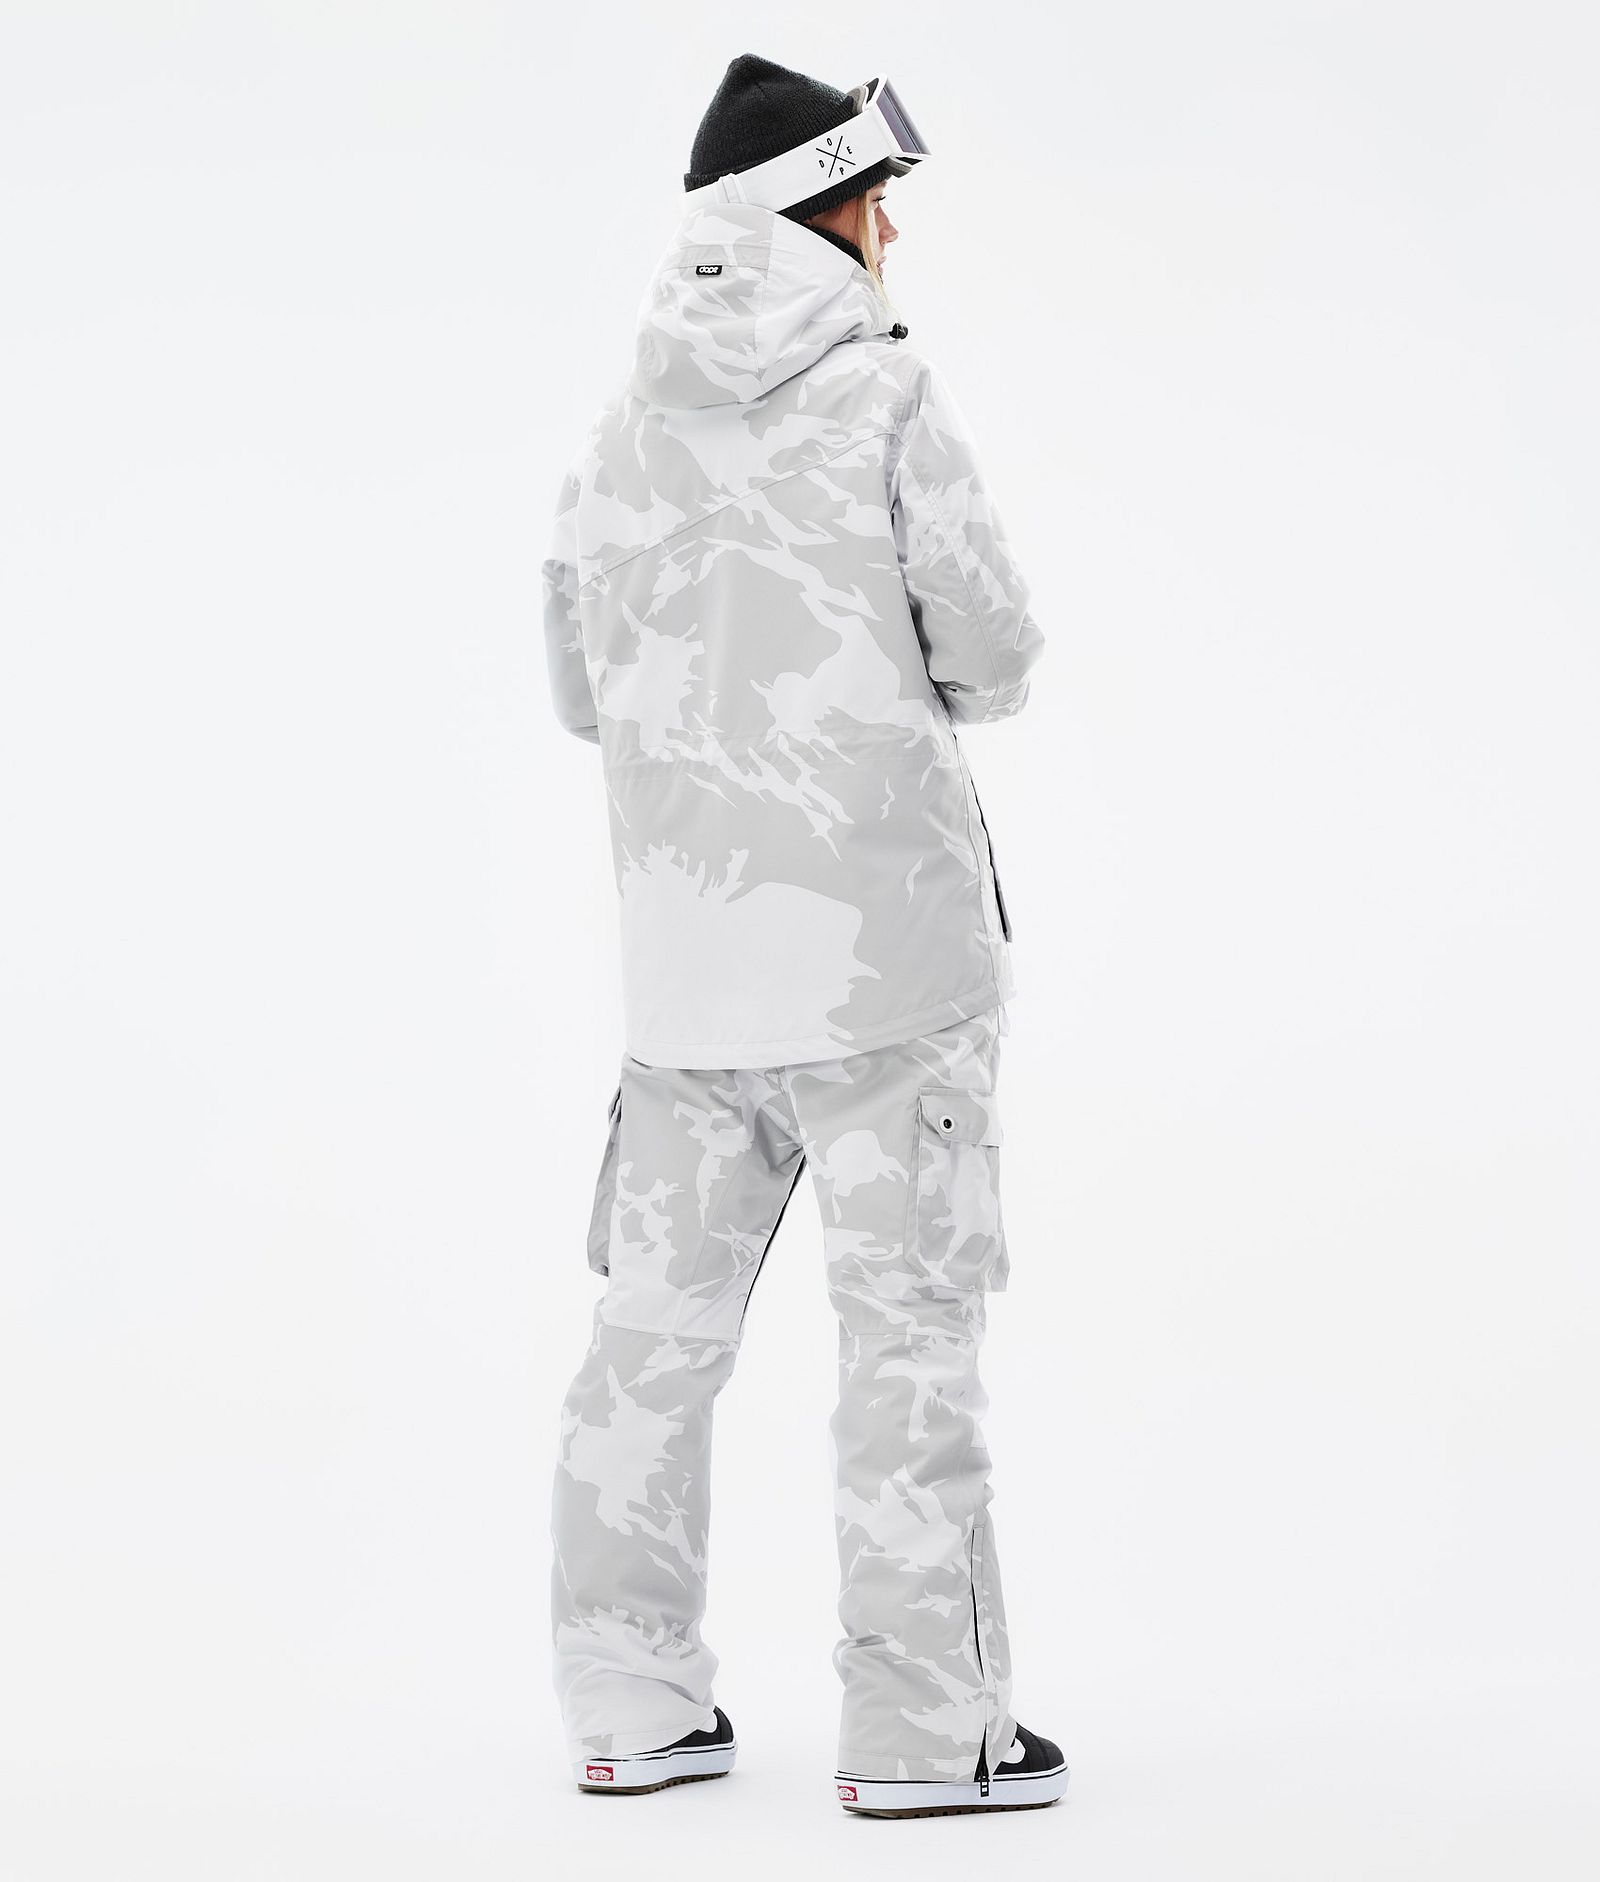 Dope Adept W Outfit Snowboard Femme Grey Camo